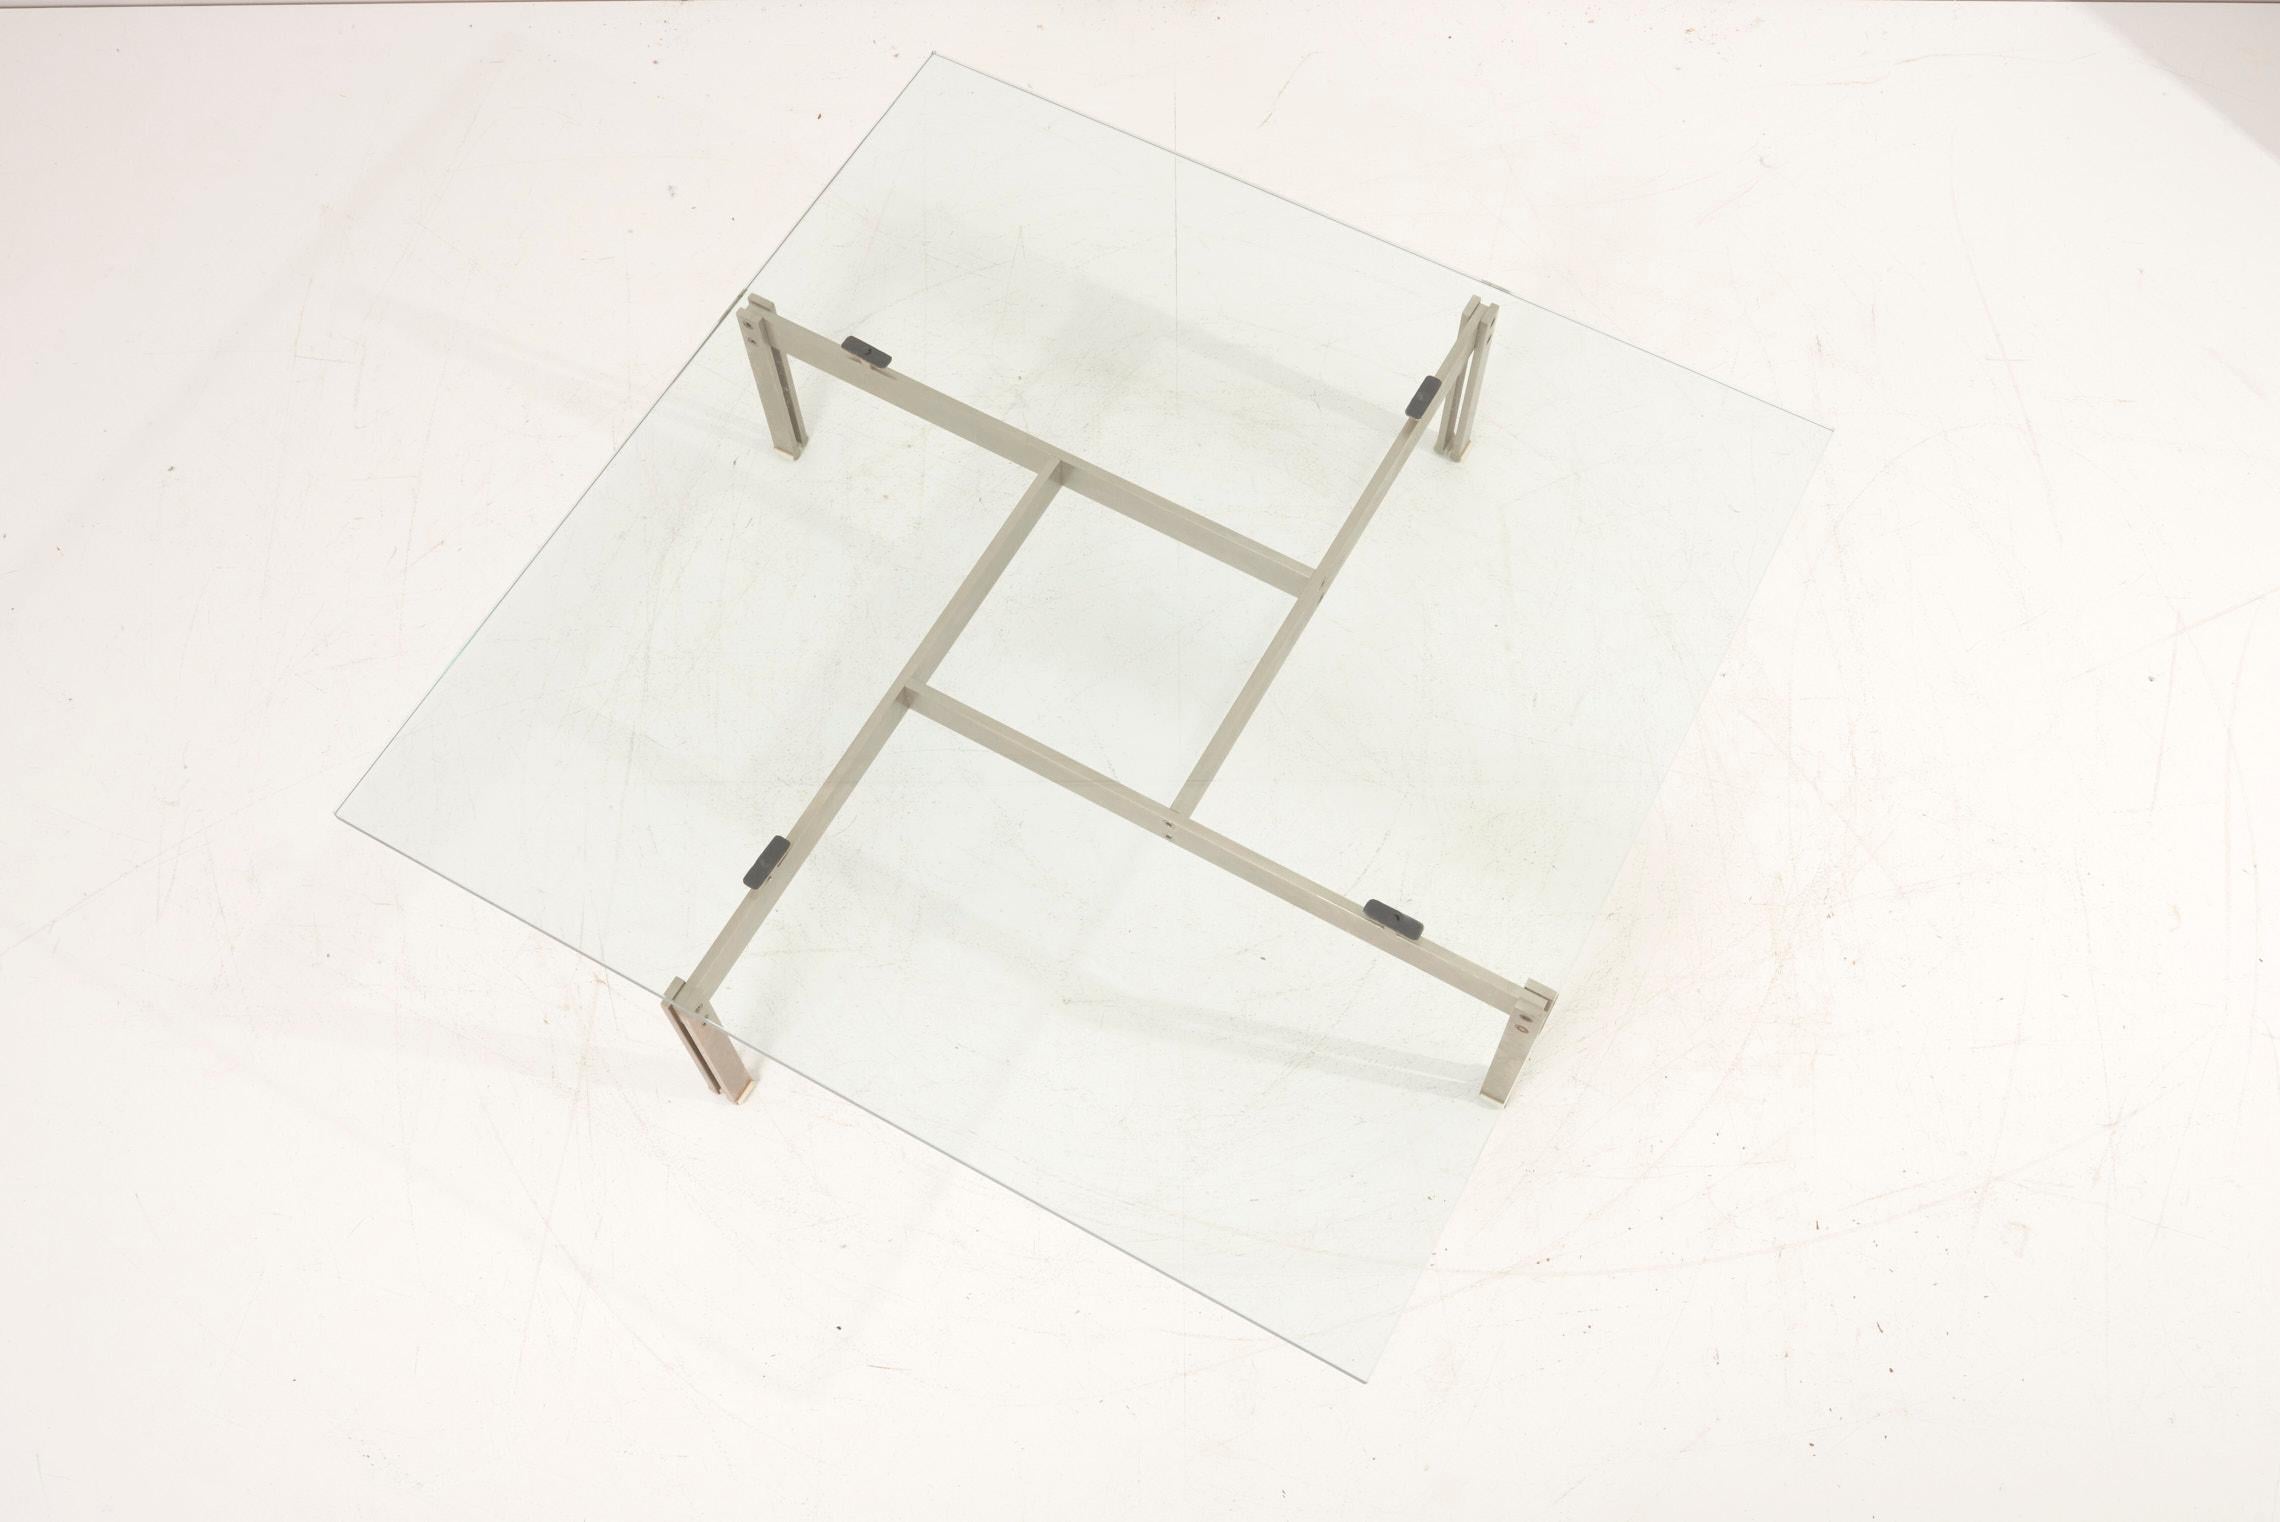 Stainless Steel Giovanni Offredi Glass Coffee Table for Saporiti, Italy 1970s